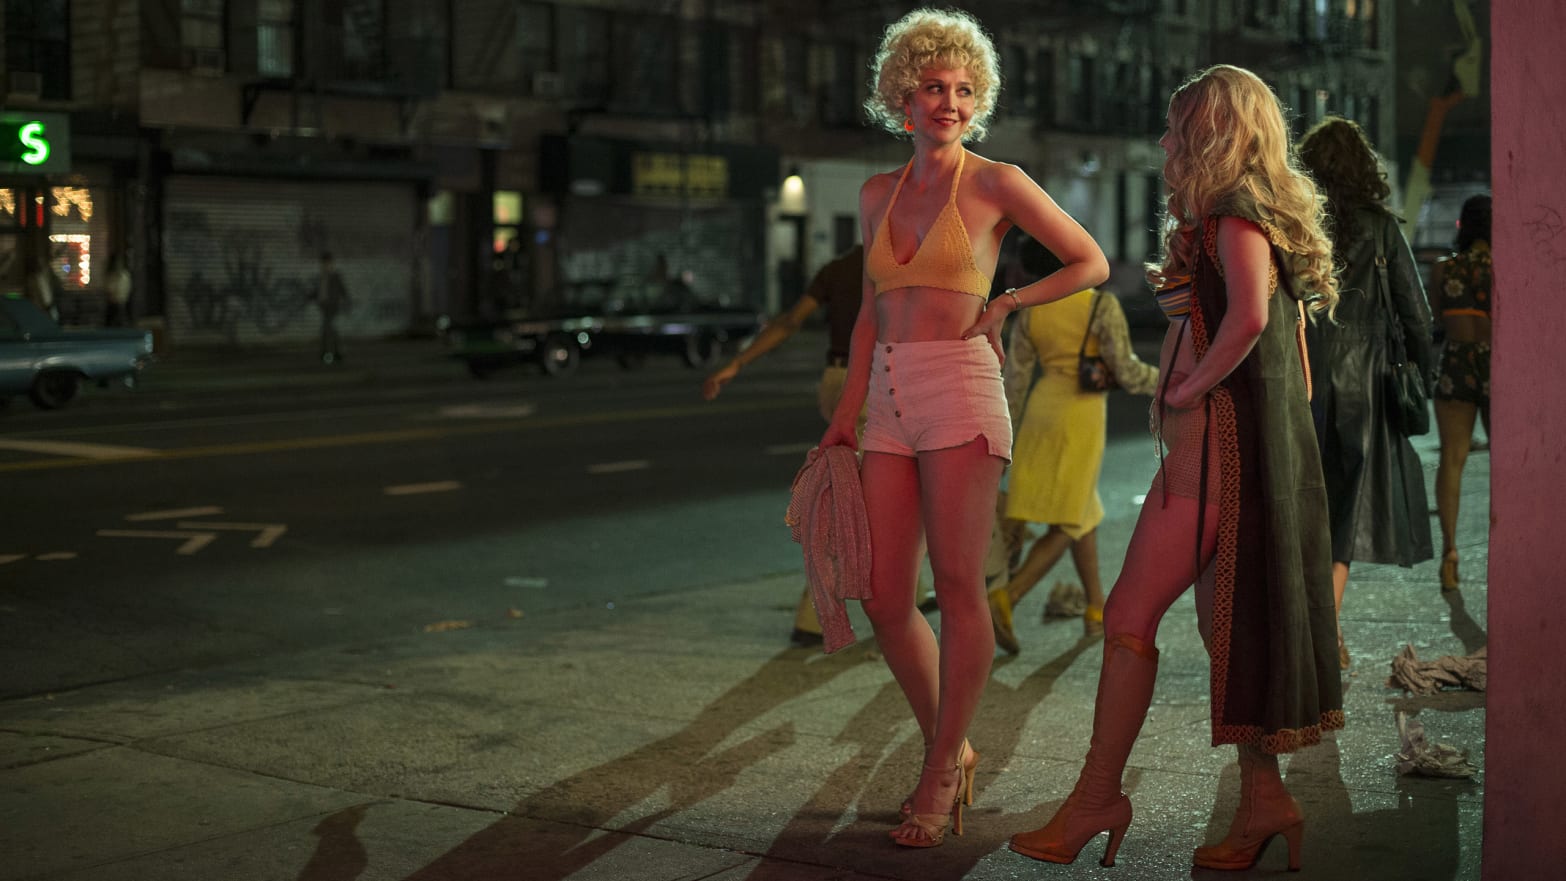 HBO's New '70s Porn Drama 'The Deuce' Casts a Female Gaze on Sex